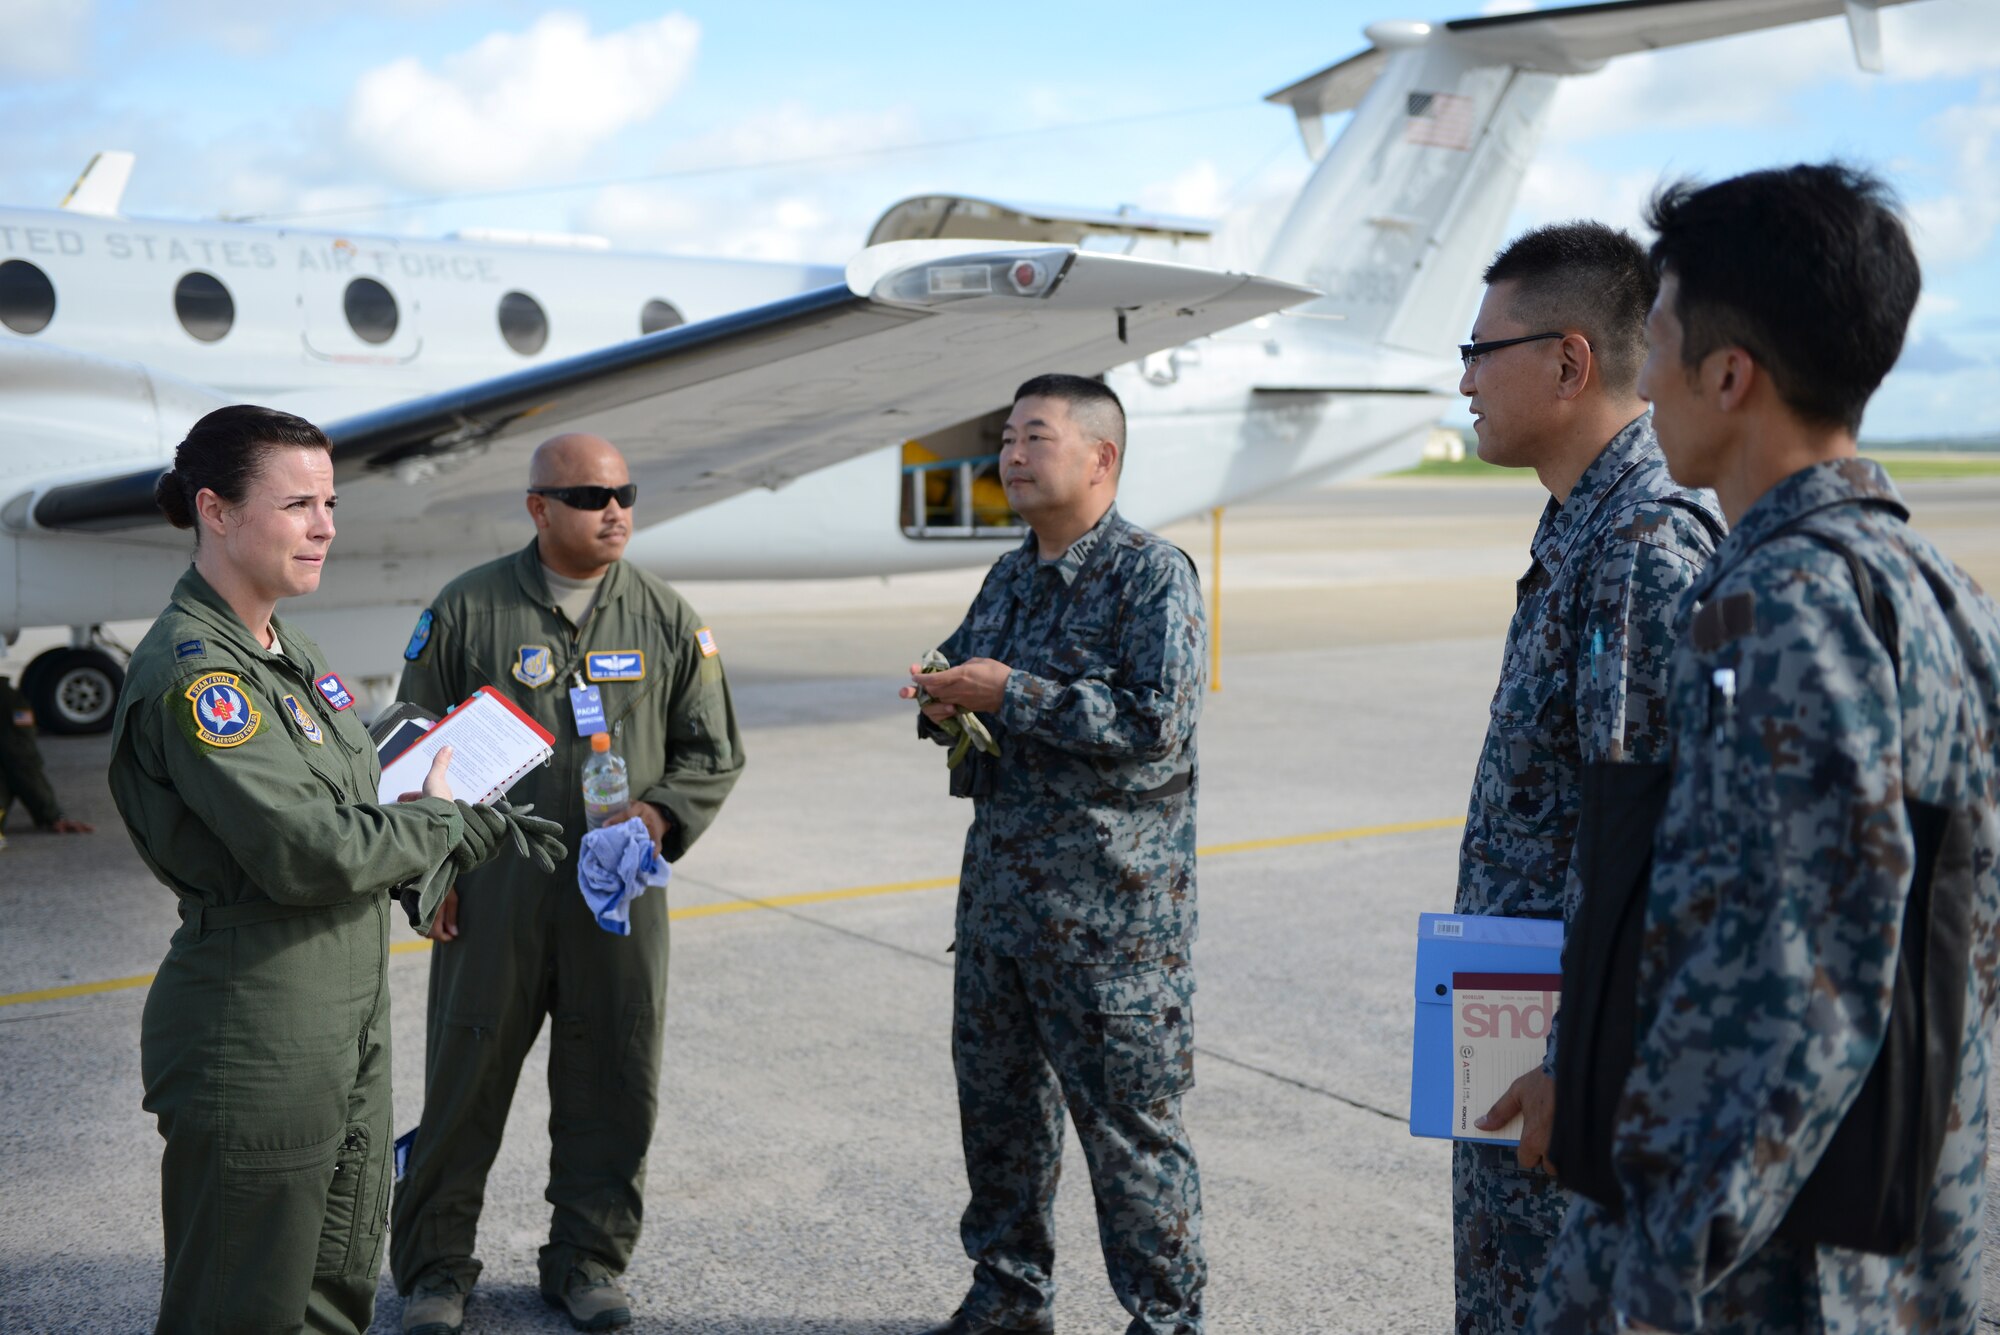 Capt. Melissa Hendricks (Left), 18th Aeromedical Evacuation Squadron flight commander, explains the medical evacuation training plan to Japan Air Self-Defense members before taking off at Kadena Air Base, Japan, Sept. 24, 2014. Hendricks was one of four 18 AES members who assisted in highlighting the C-12 medevac capabilities to the JASDF members. (U.S. Air Force photo by Staff Sgt. Cody H. Ramirez/Released)